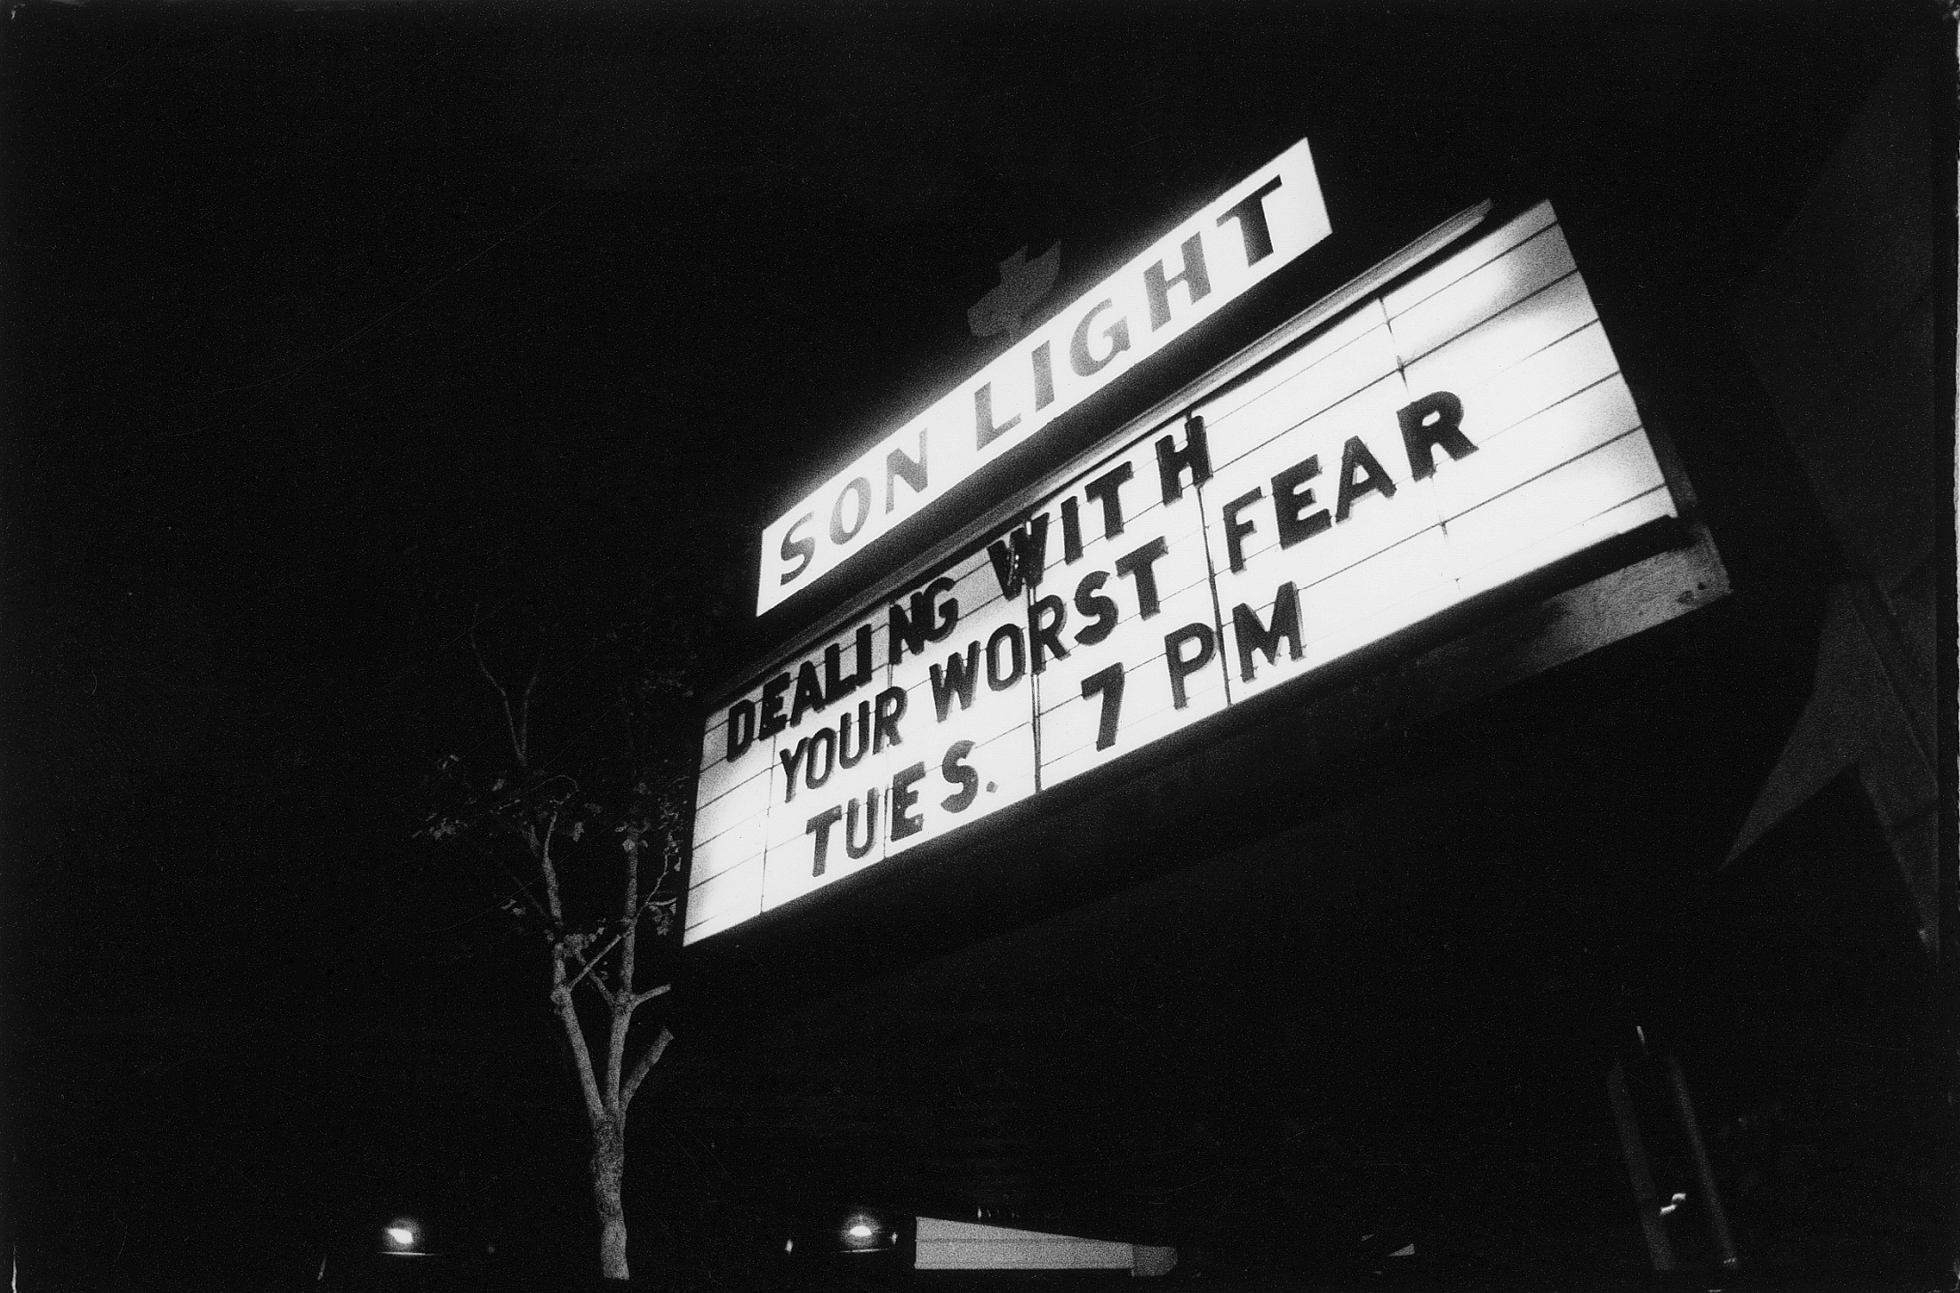 A marquee that reads “DEALING WITH YOUR WORST FEAR, TUES 7 PM.”